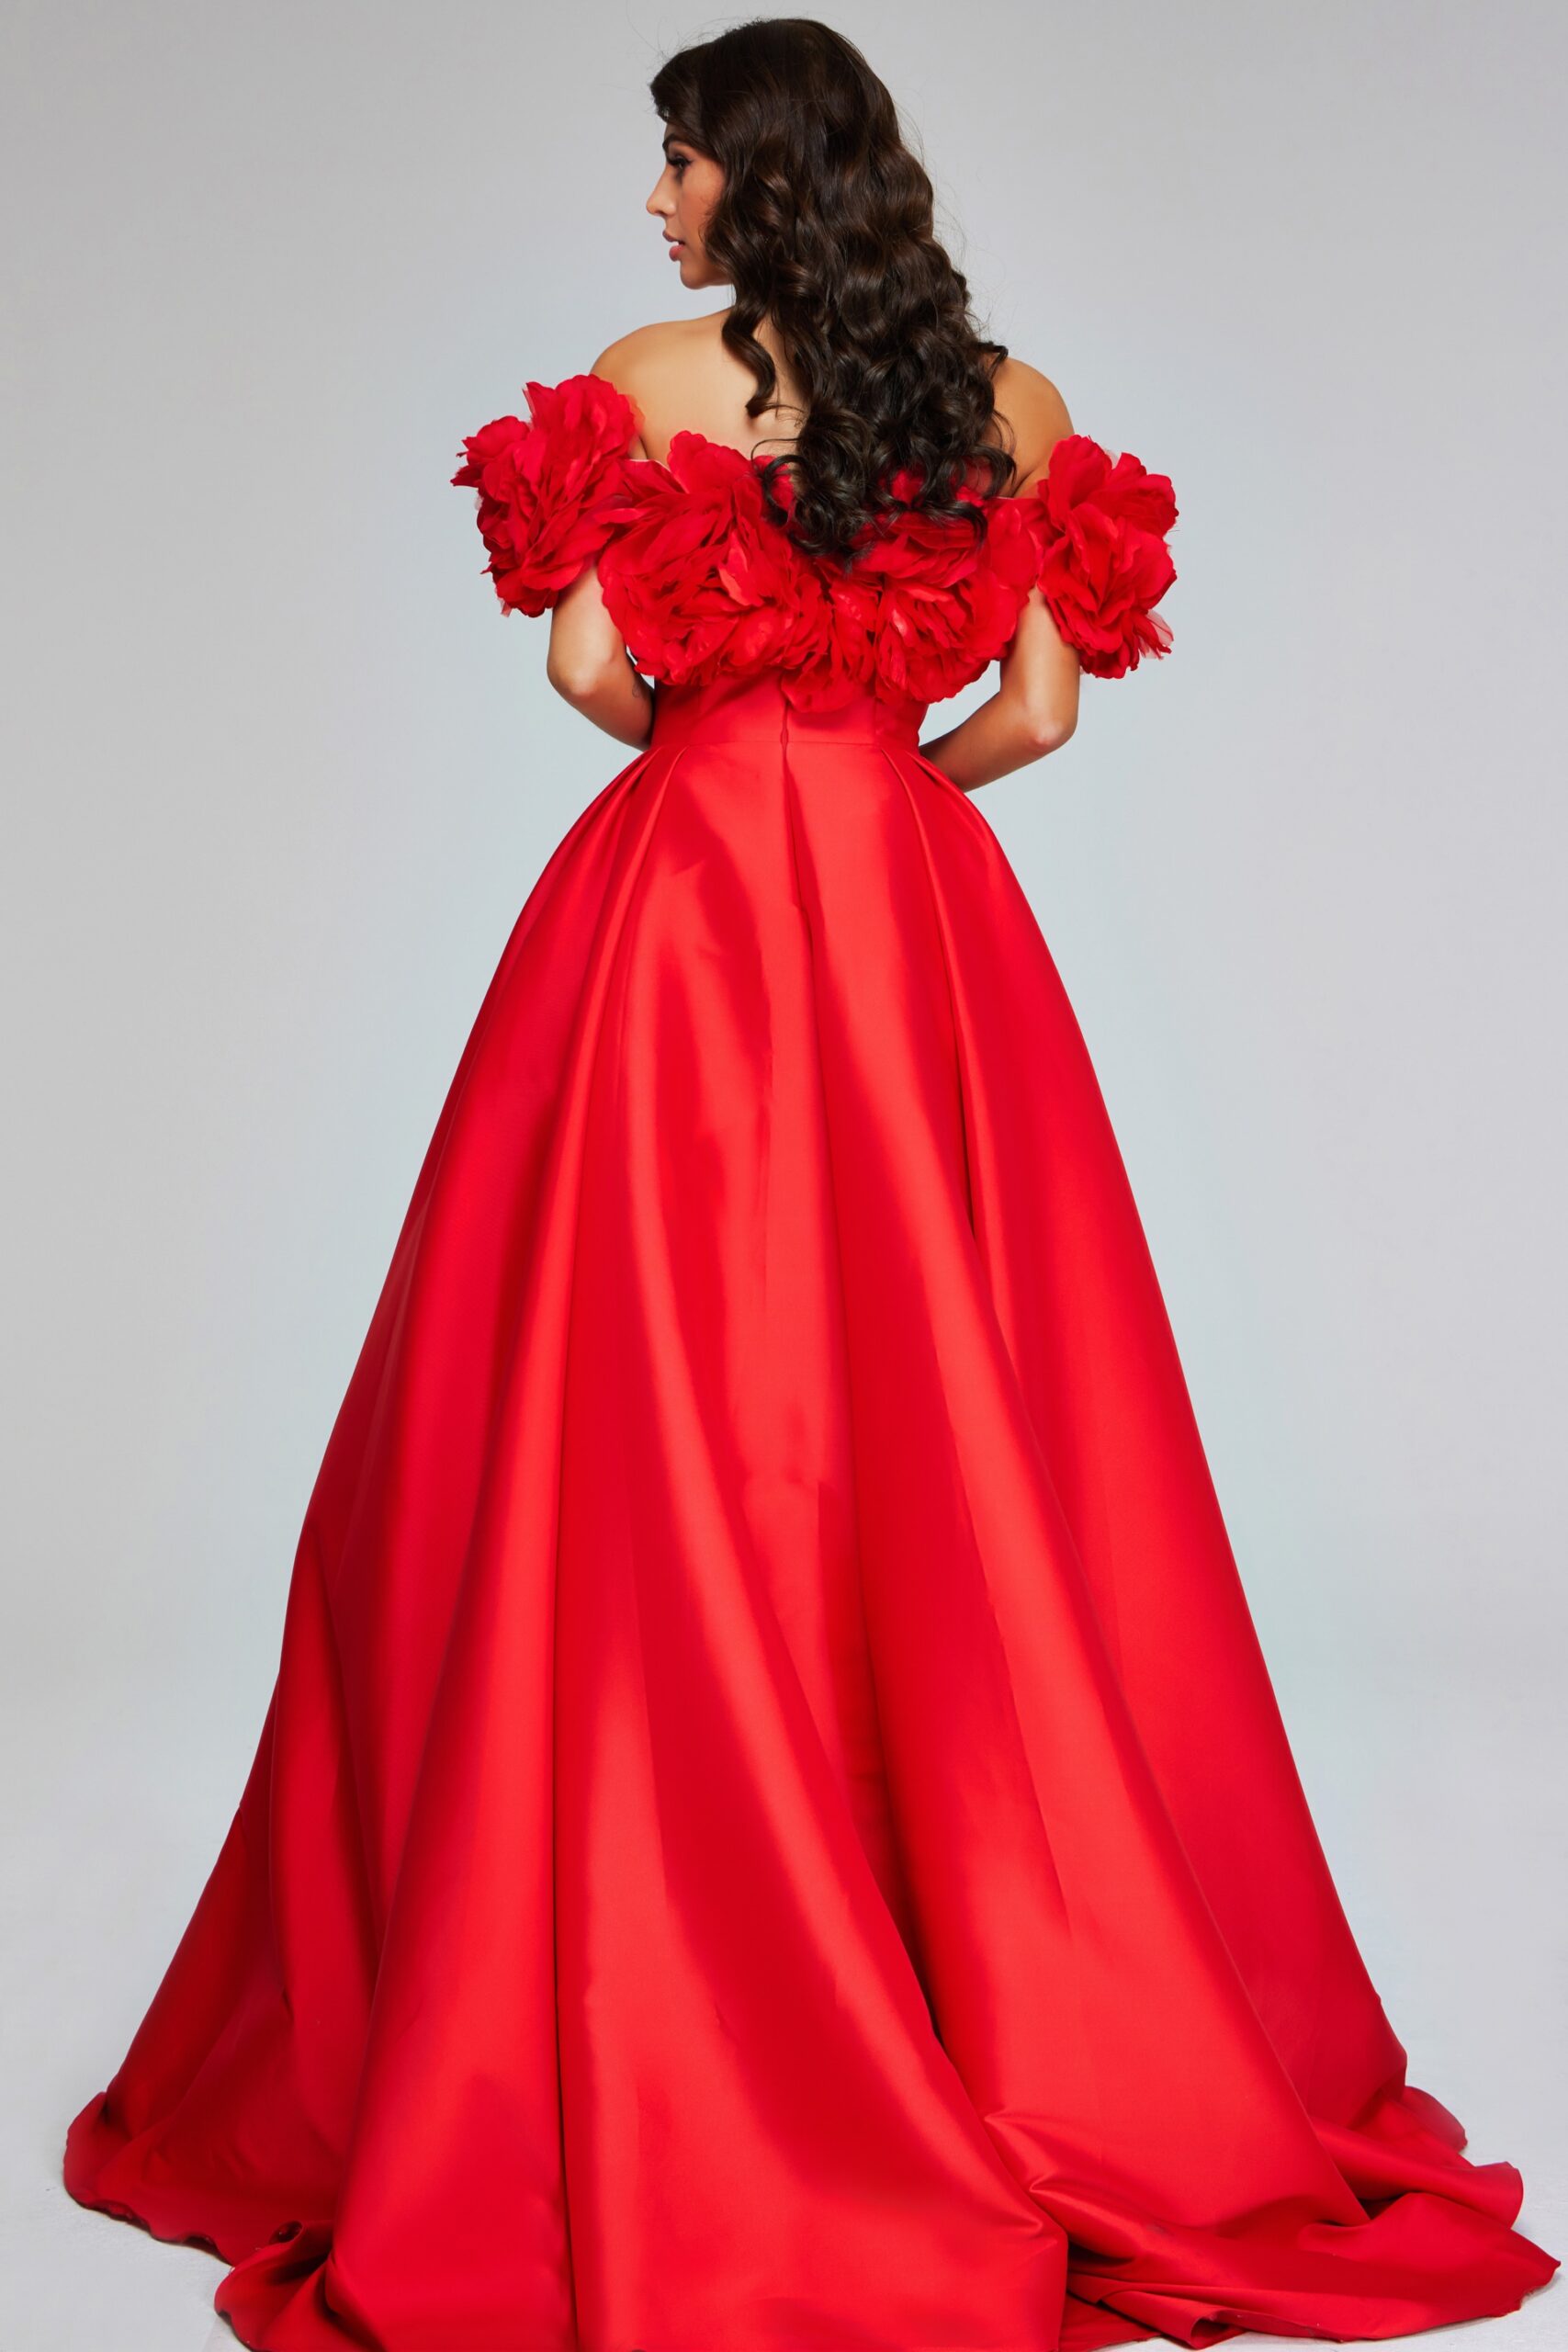 Bold Red Gown with Floral Puff Sleeves and Plunging Neckline 40794